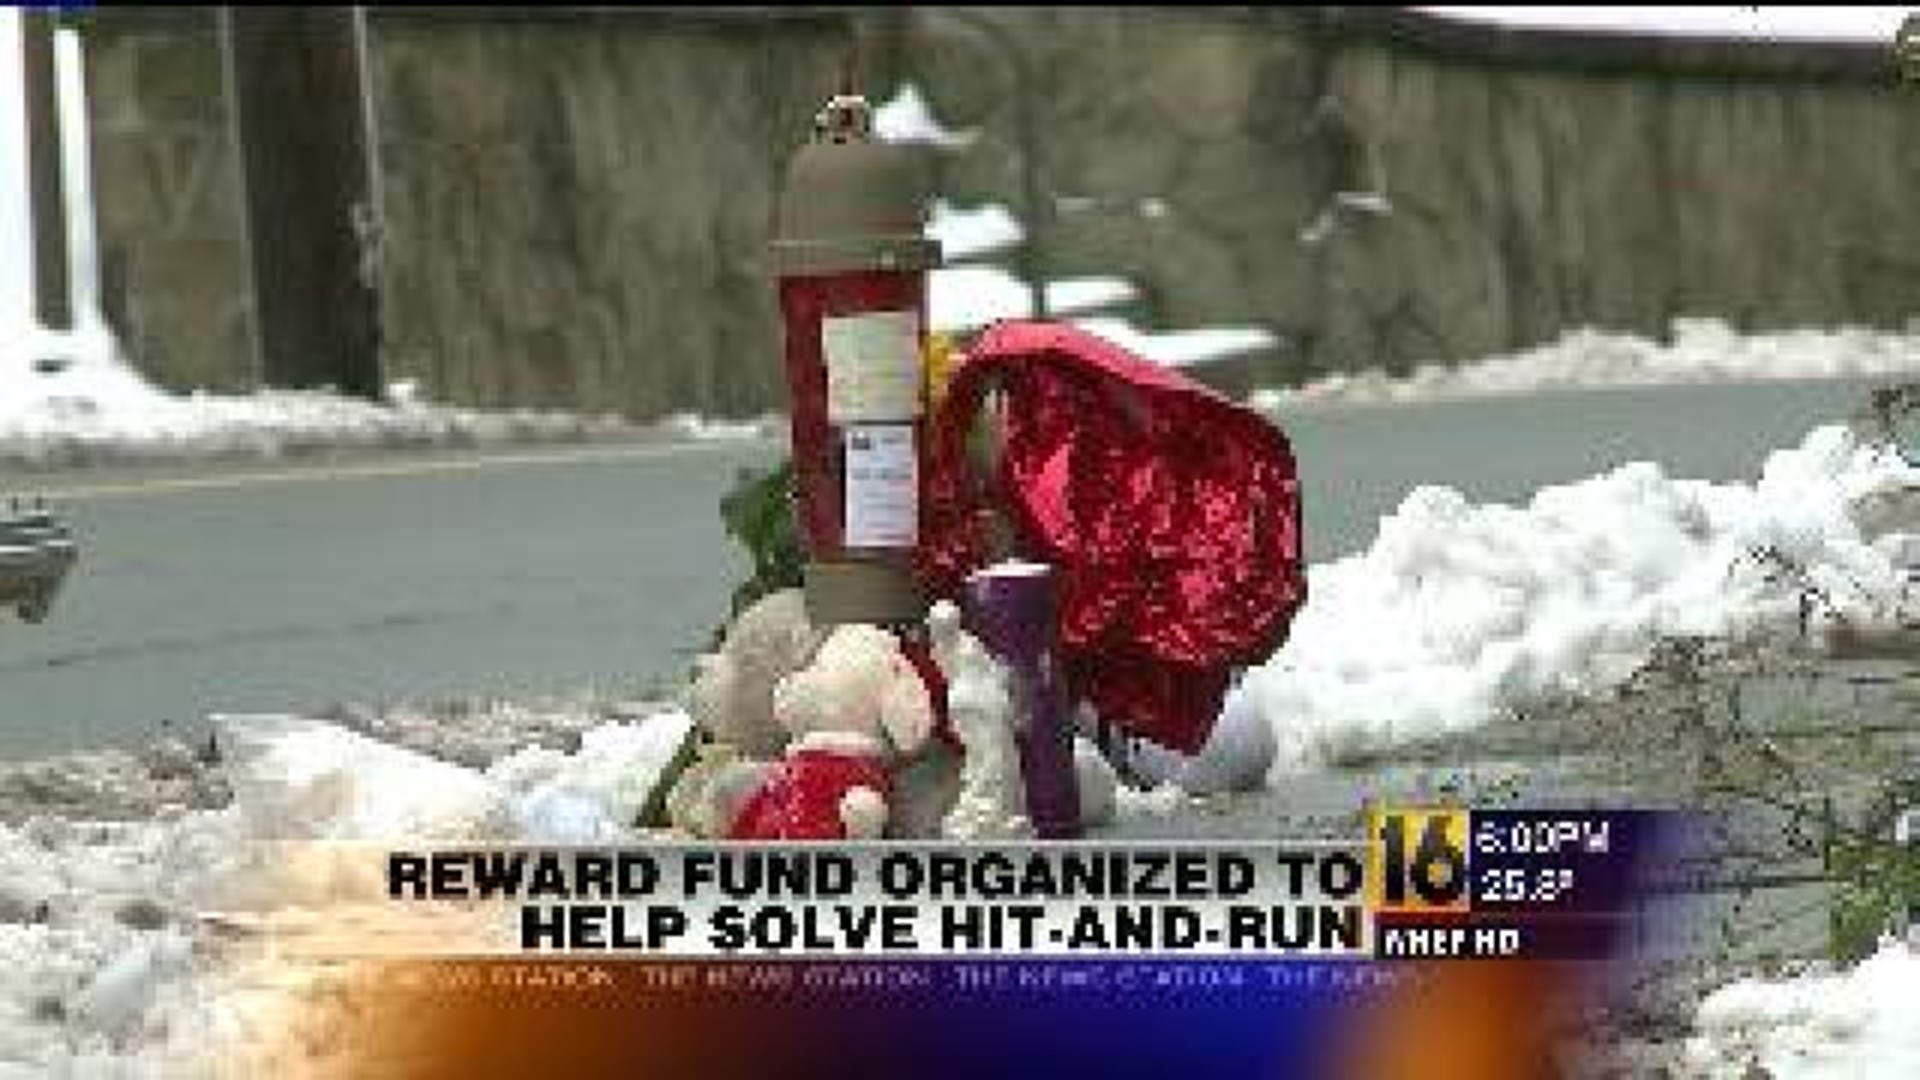 Businesses Start Reward Fund to Help Police Find Hit-and-Run Driver